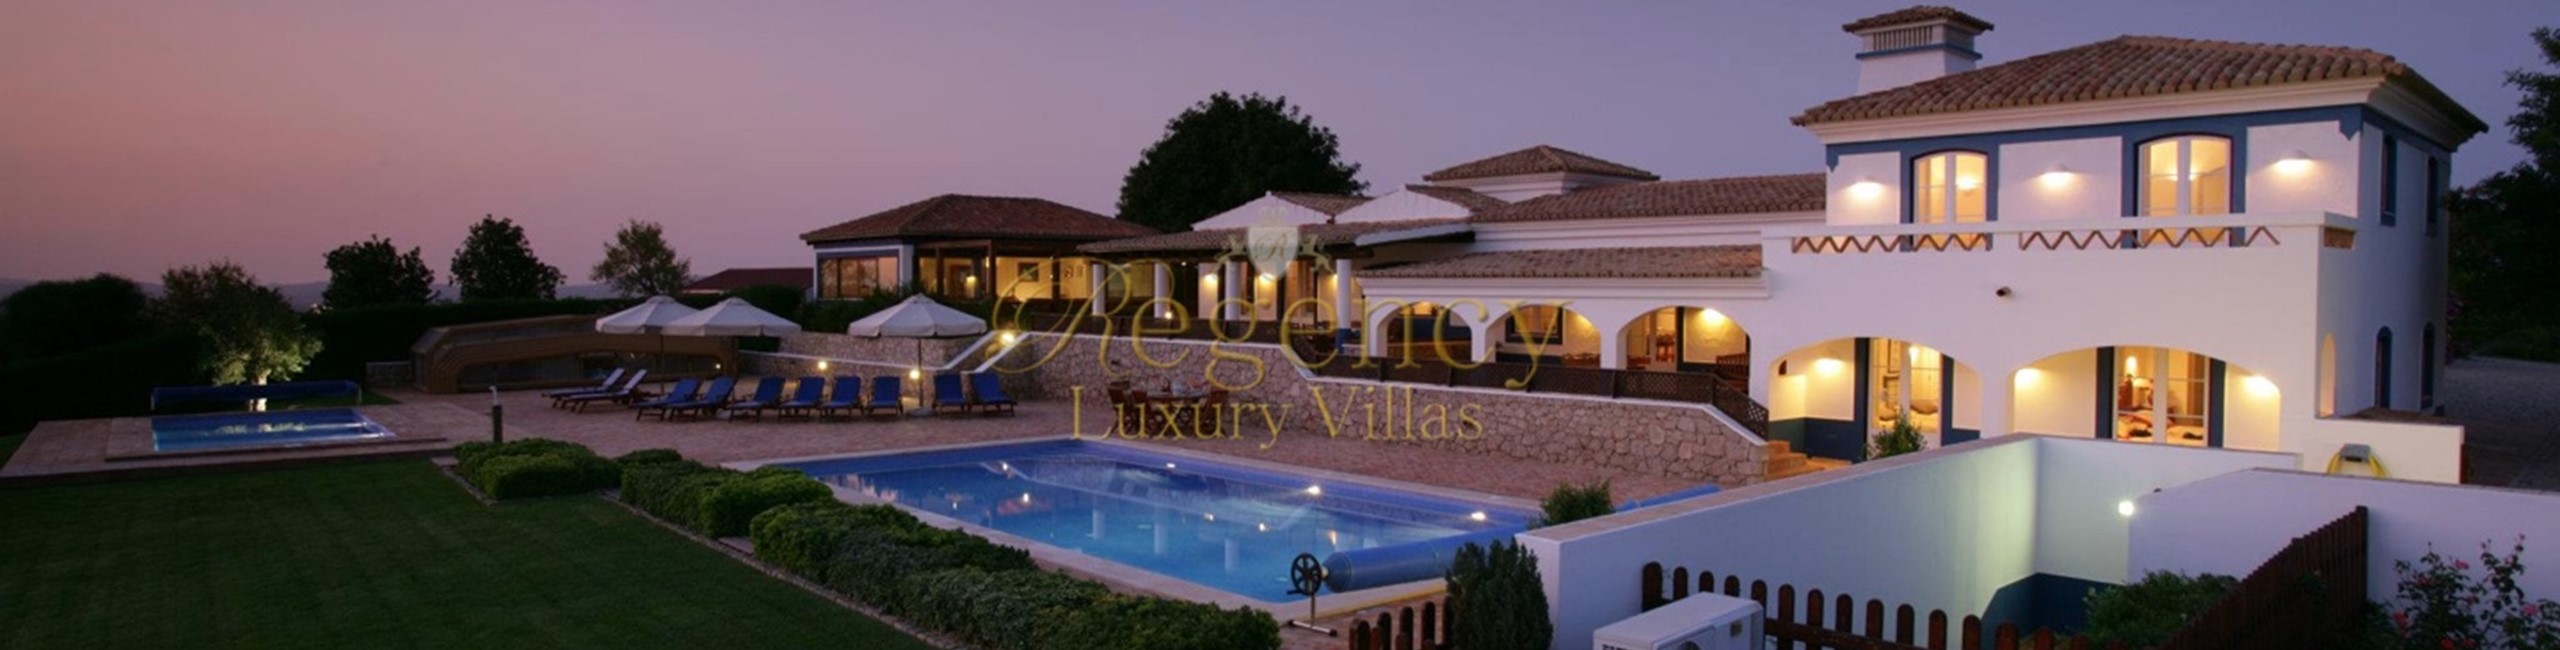 Private Villa With 7 Bedrooms In Vilamoura Portugal